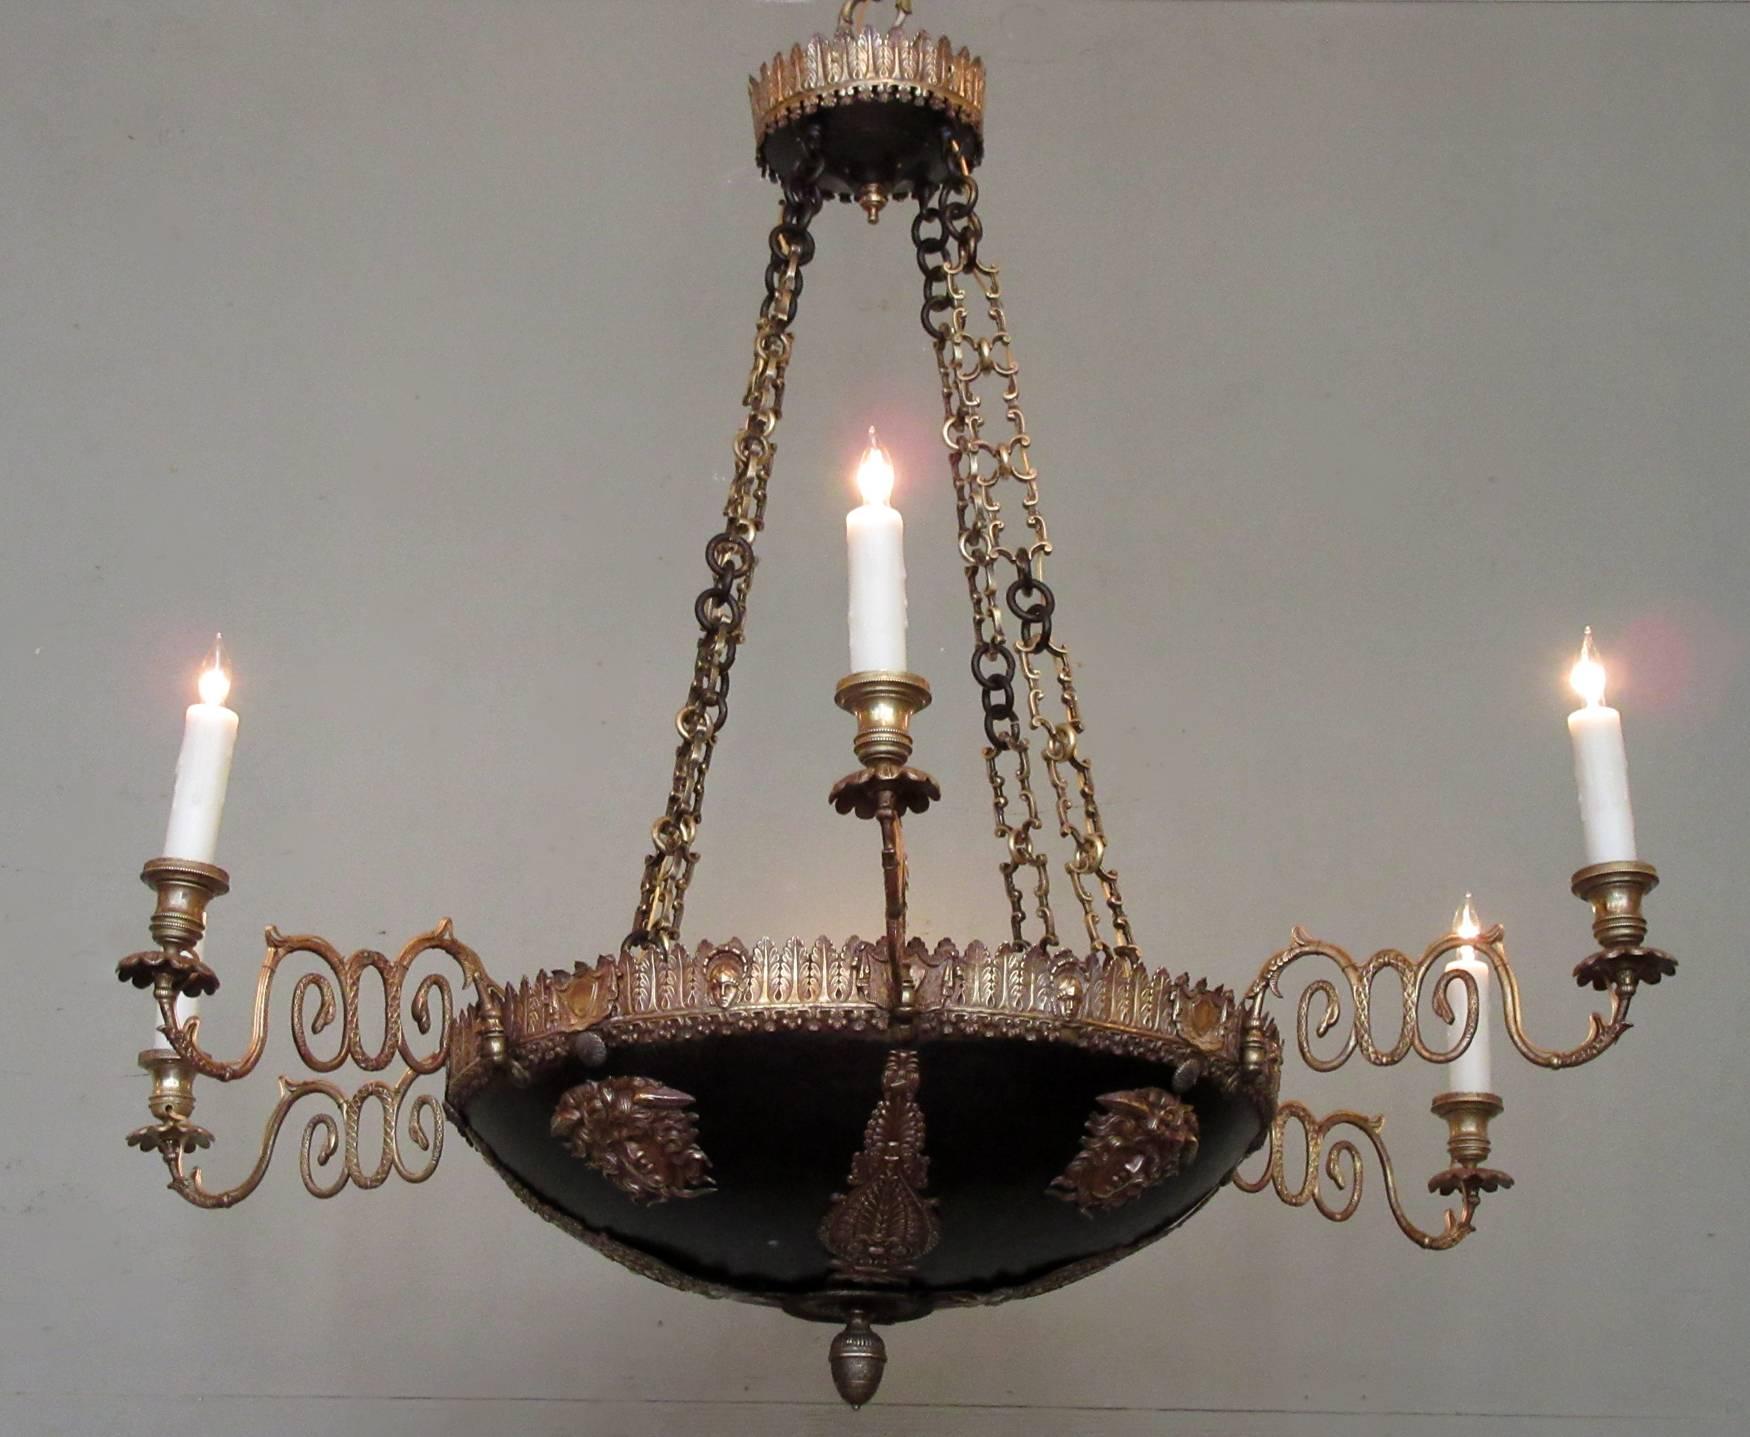 This dramatic chandelier was made in Italy in the late-18th century, circa 1780, and features a canopy bordered with acanthus leaves that has three supporting chains. The bowl of the chandelier is patinated bronze with applied bronze neoclassical